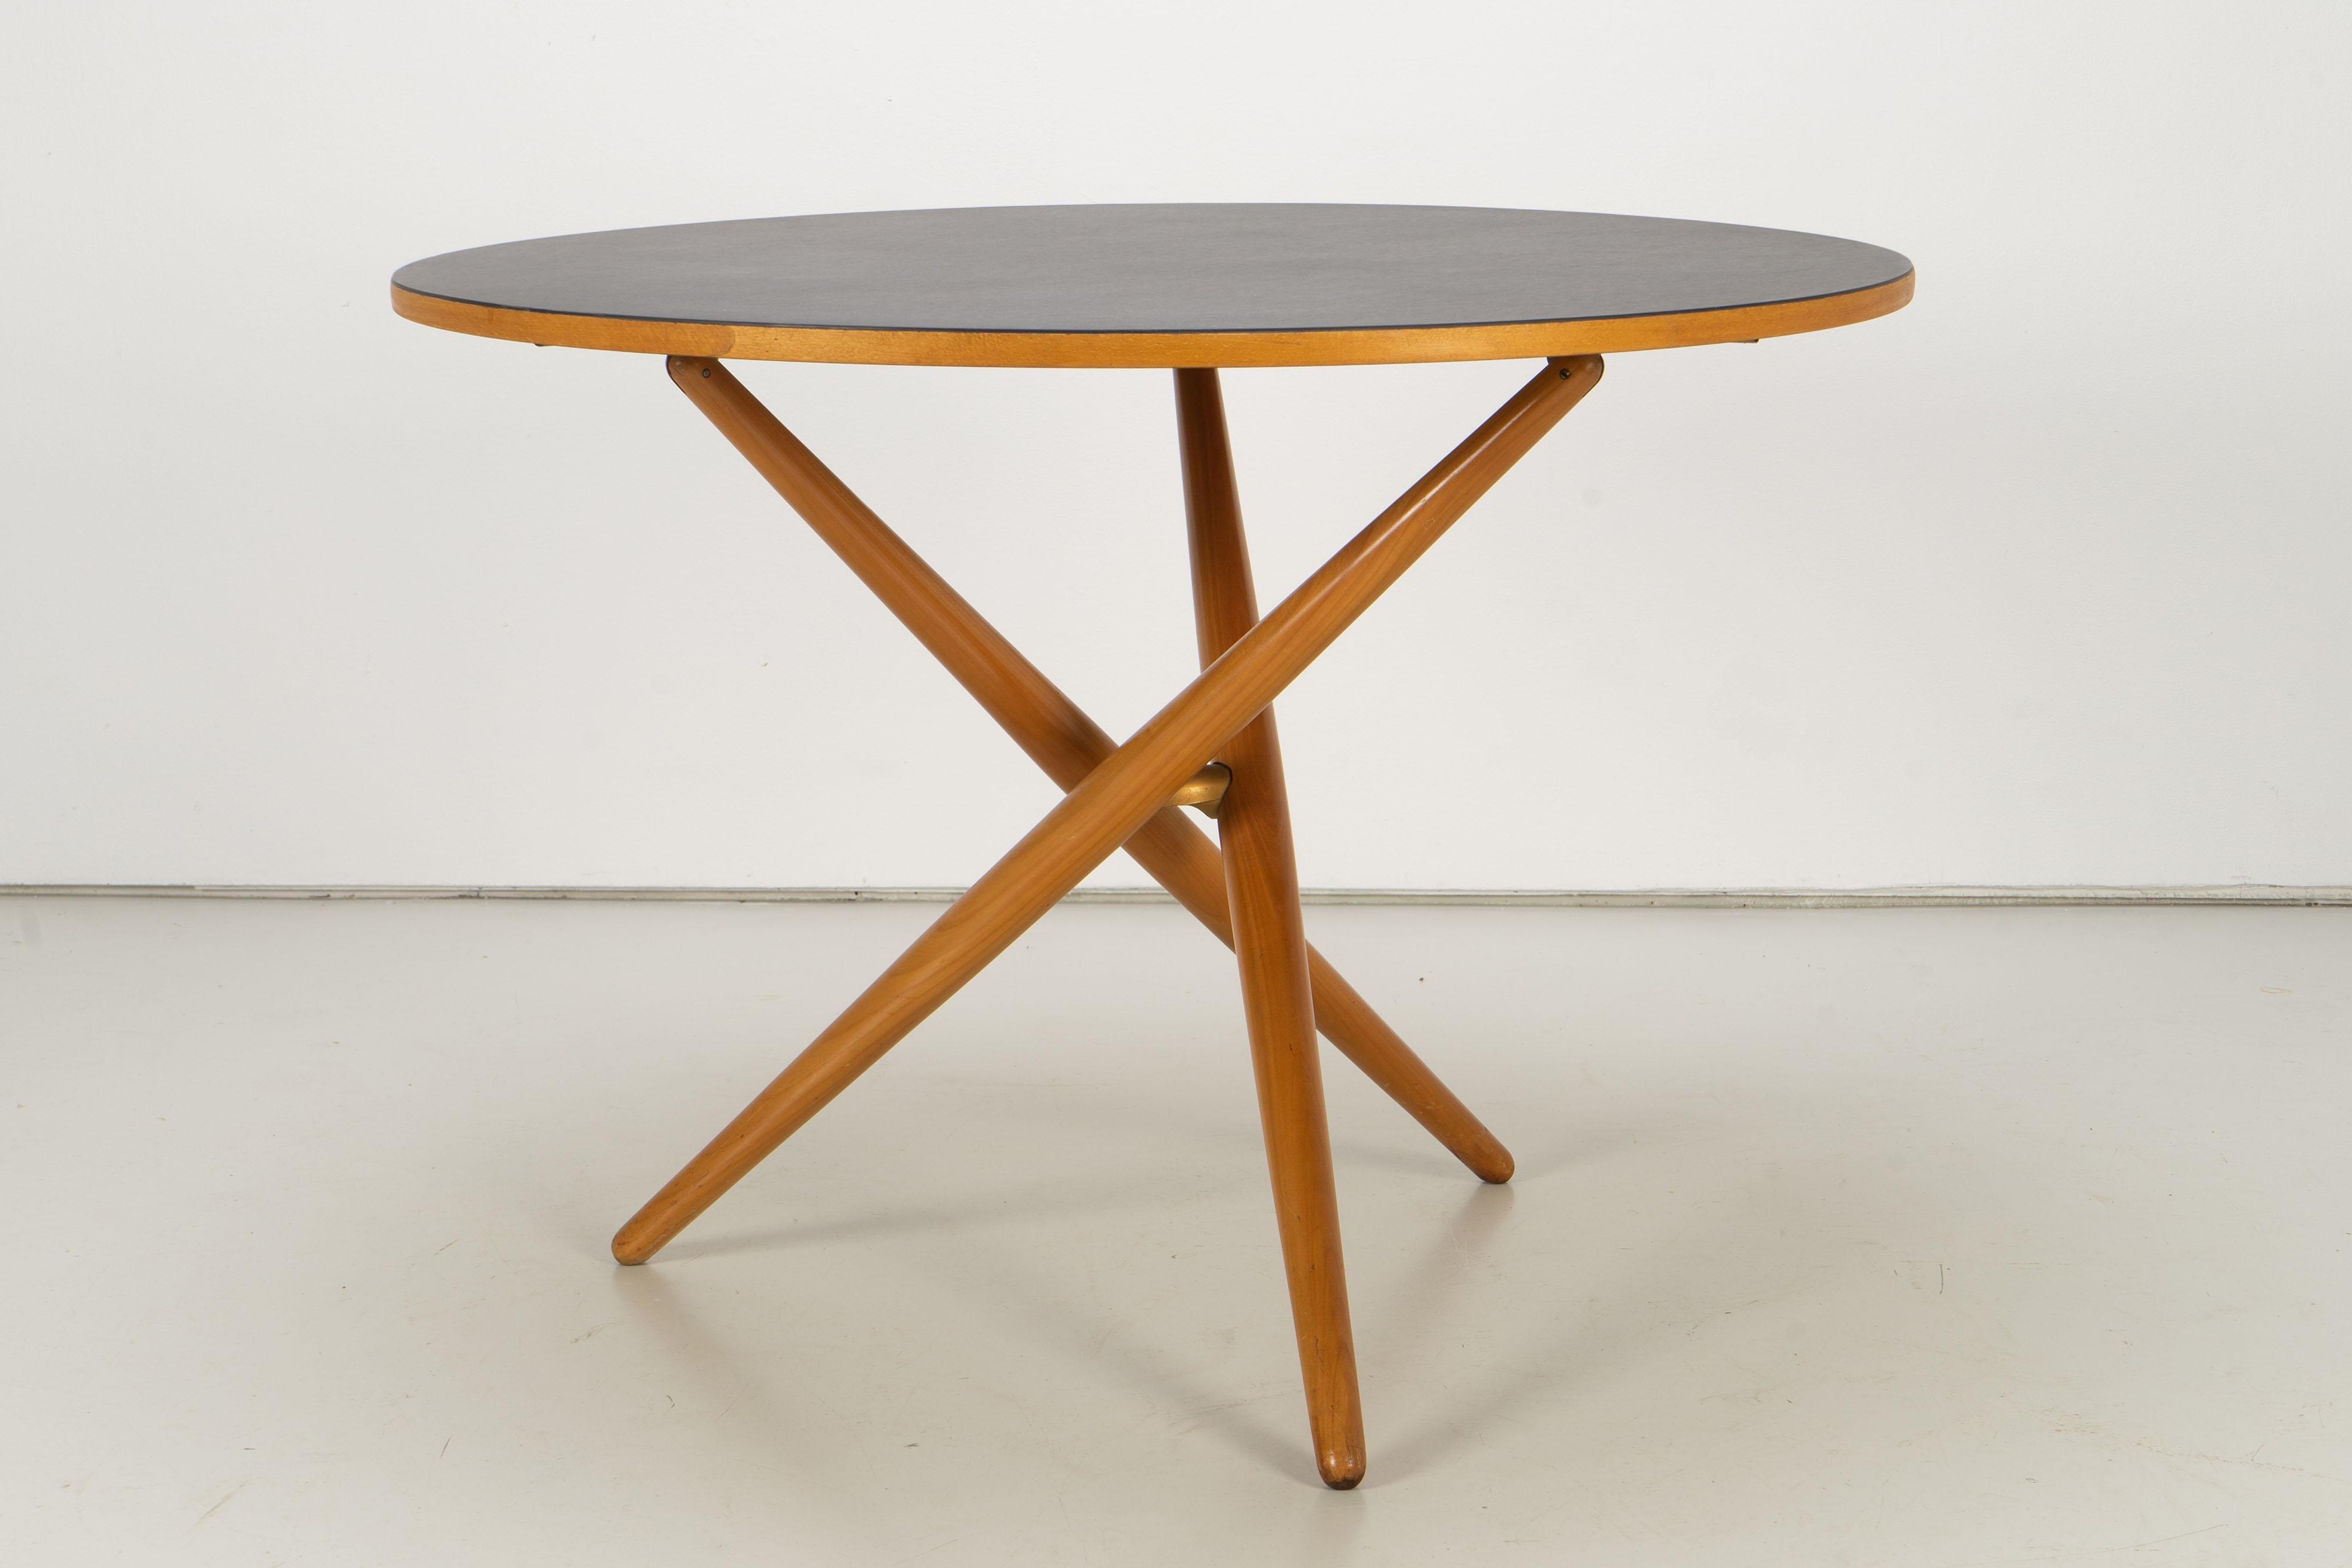 Swiss Mid-Century Height-Adjustable Coffee Table by Jürg Bally for Wohnhilfe, 1951 For Sale